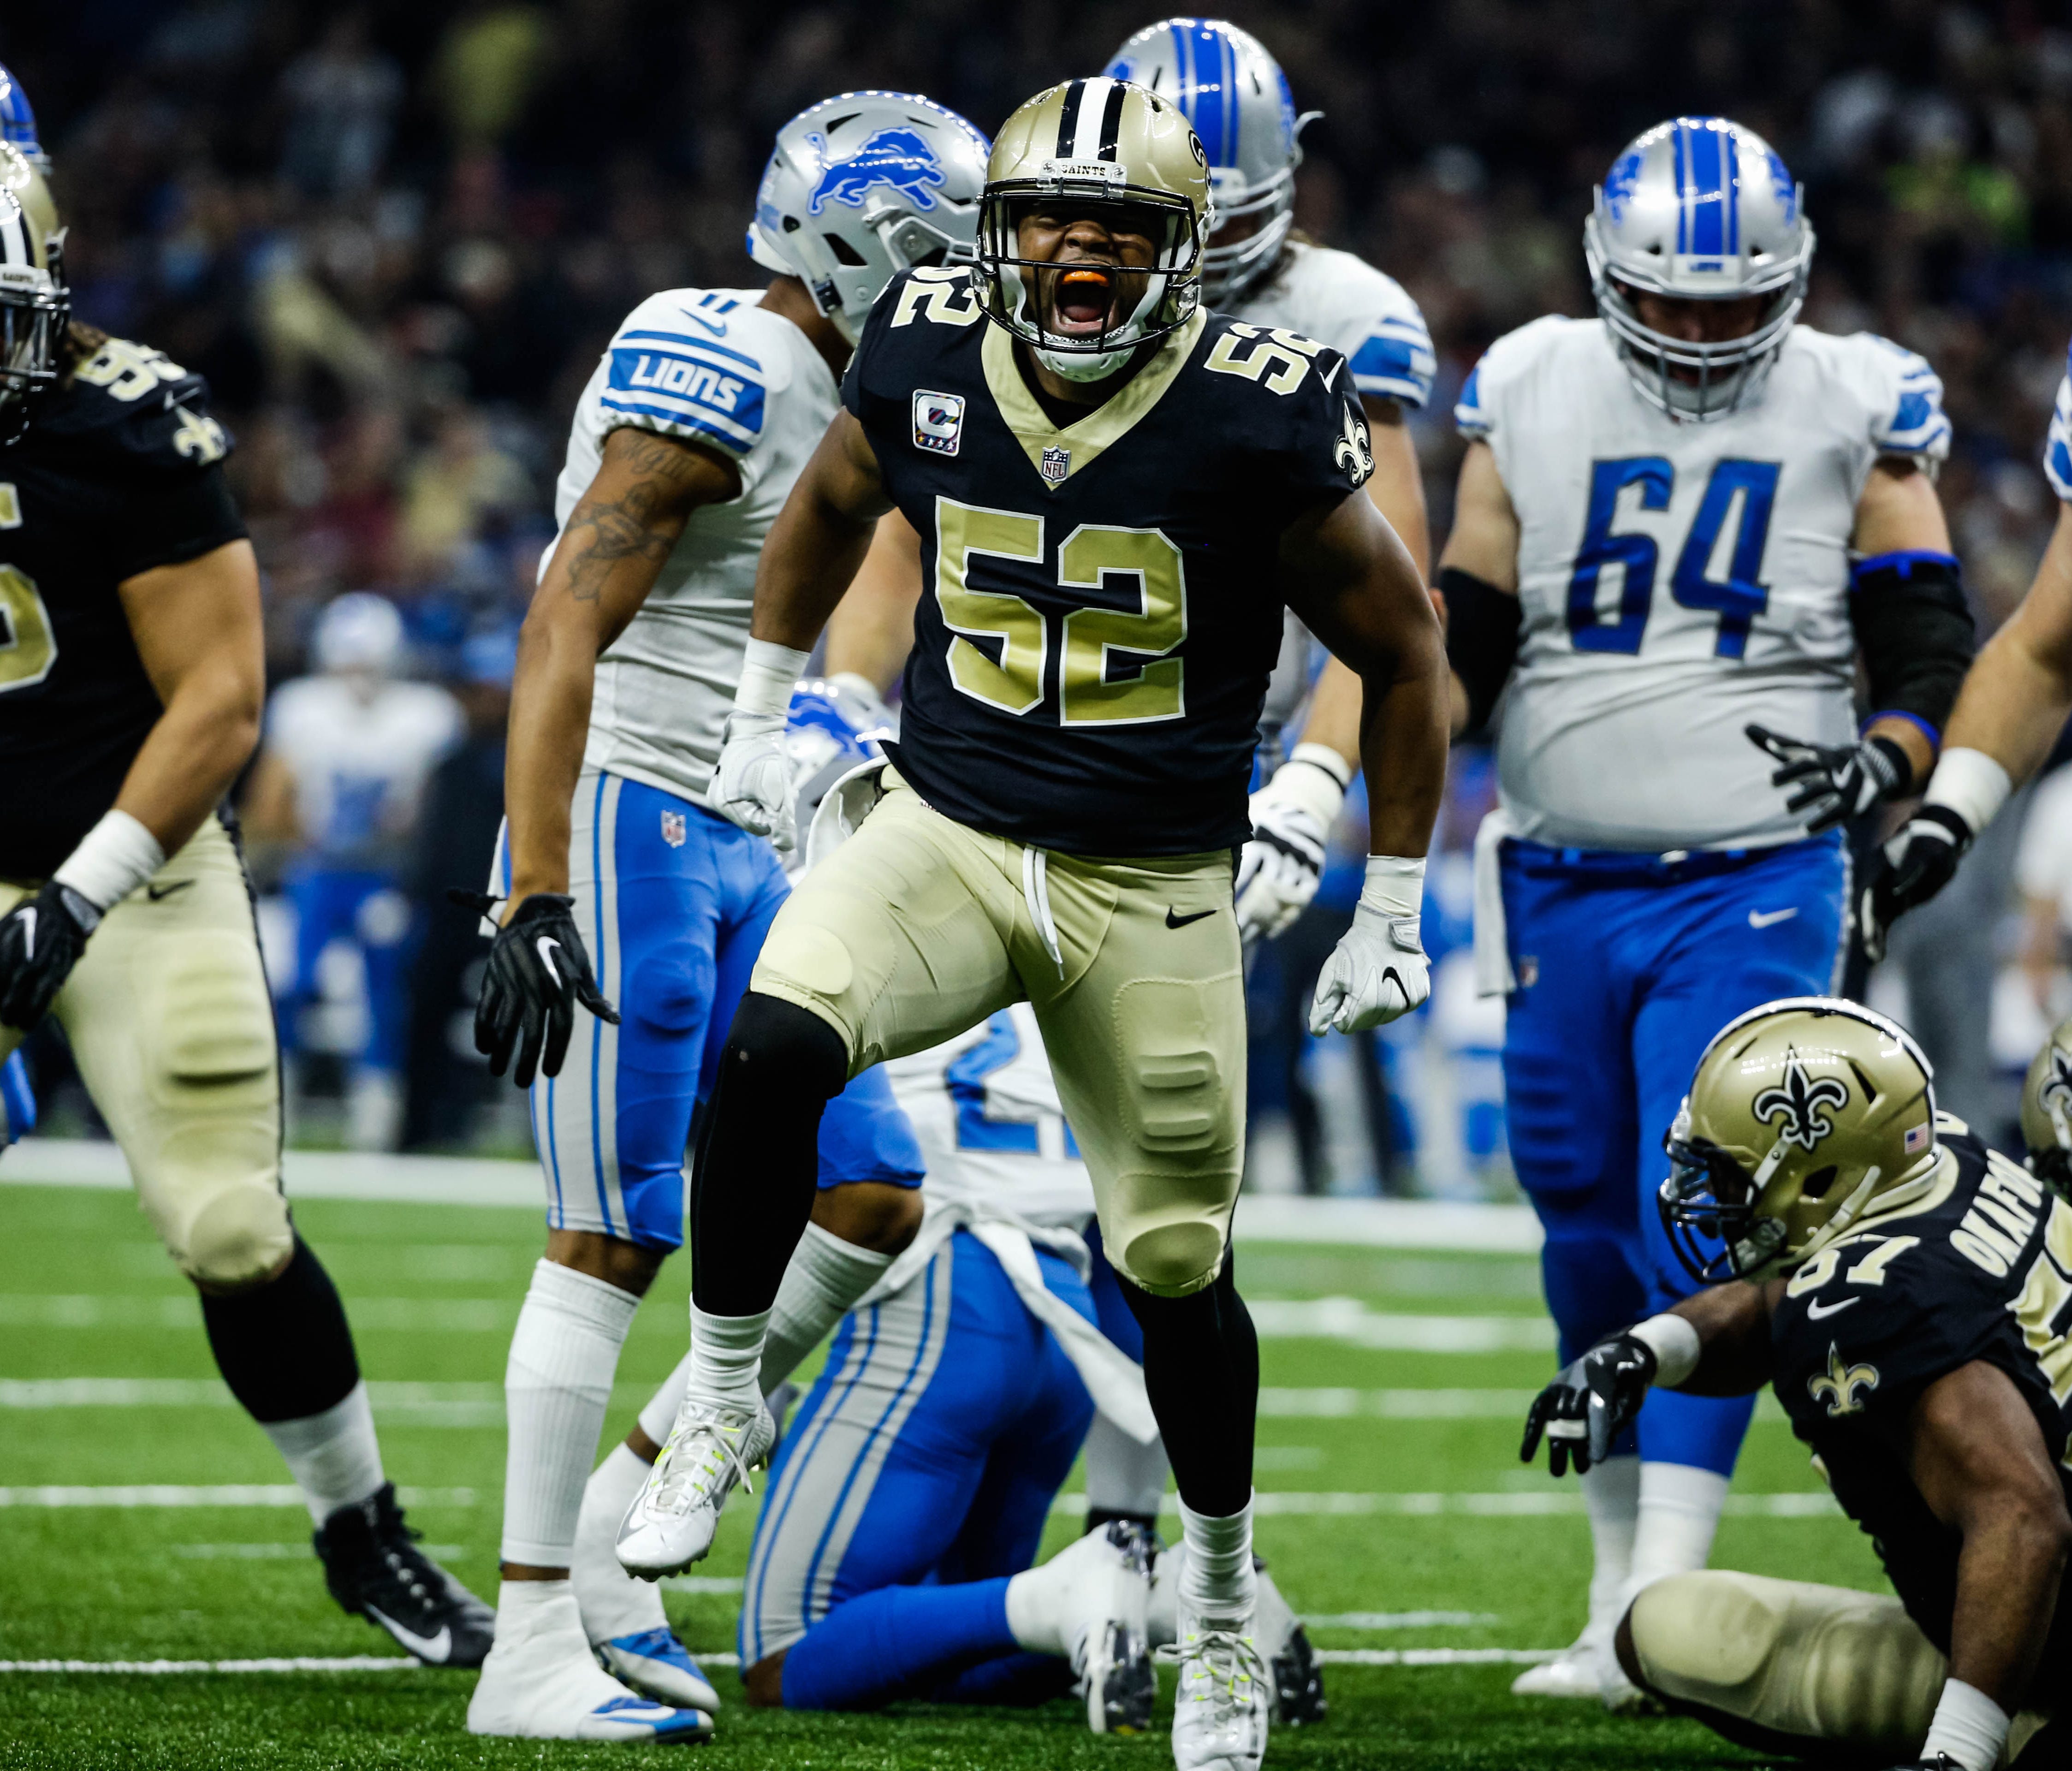 New Orleans Saints outside linebacker Craig Robertson (52) celebrates a defensive stop against the Detroit Lions during the first quarter of a game at the Mercedes-Benz Superdome.